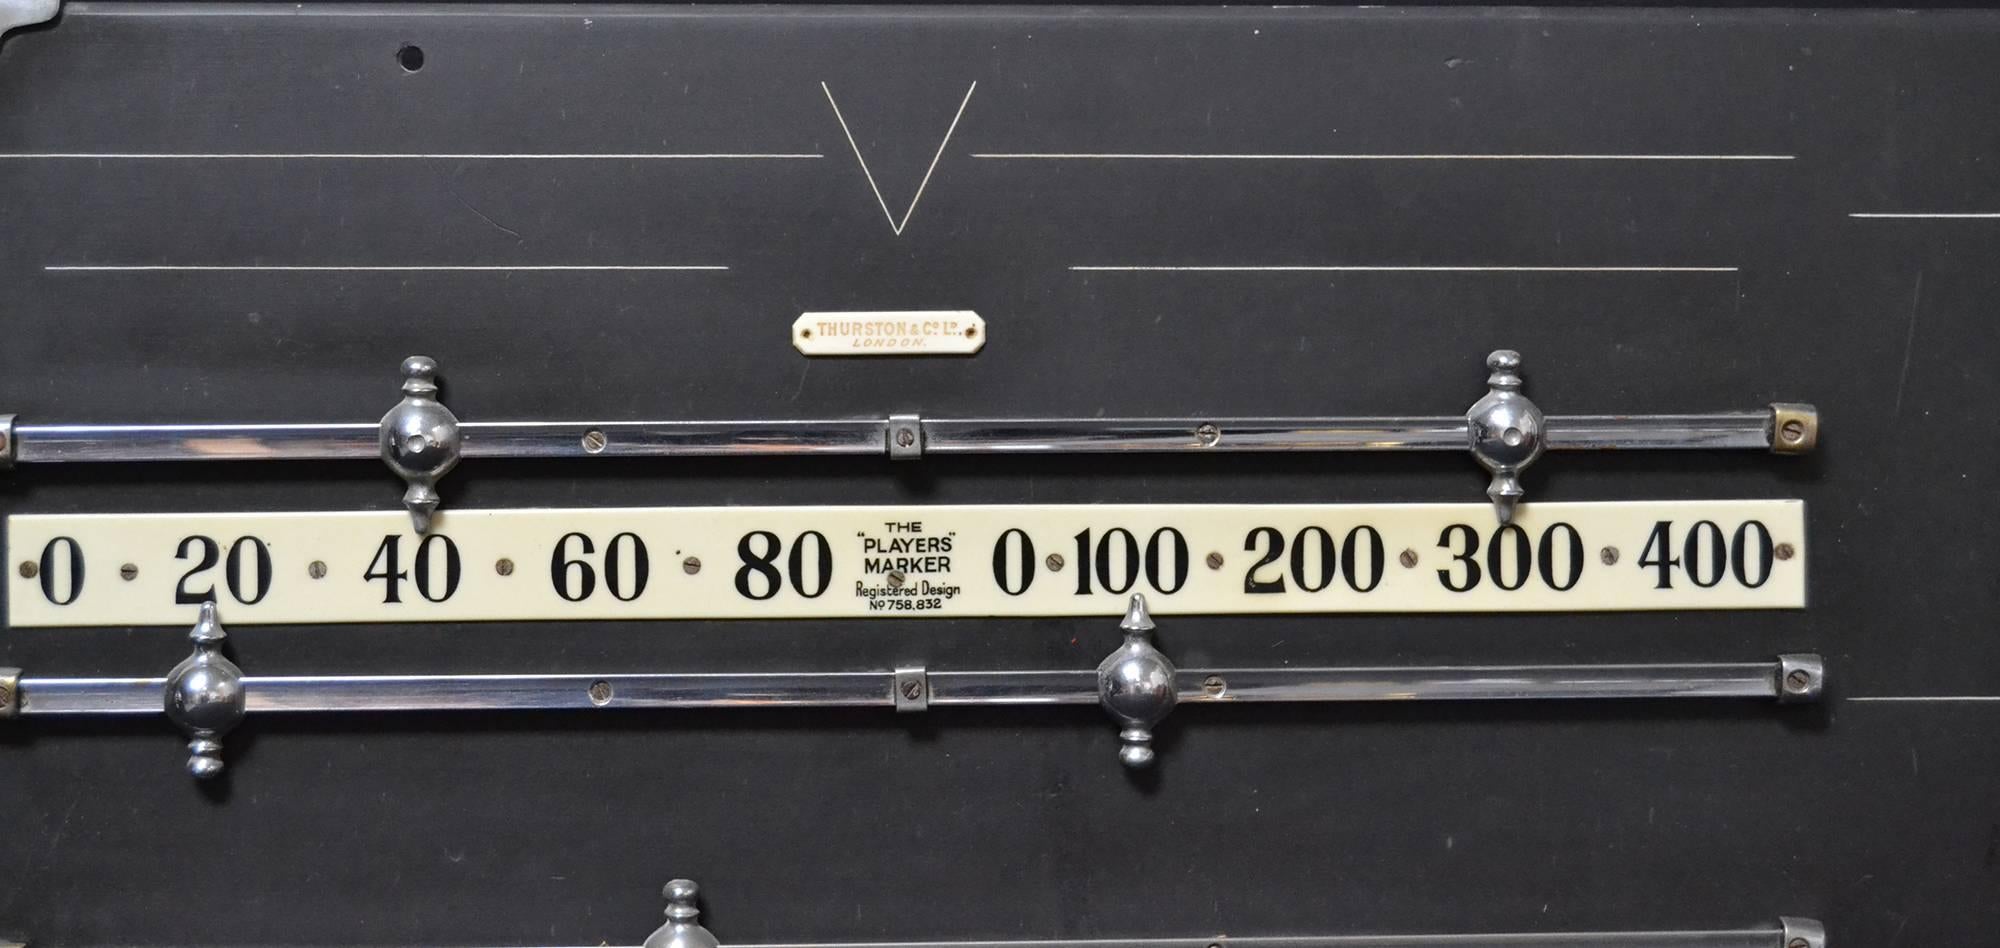 An extremely rare solid slate antique billiard - snooker scoreboard with nickel-plated rails and pointers, stylized italic numbers and al chalk holding pouch,
circa 1910.

Billiard Room Ltd Bath